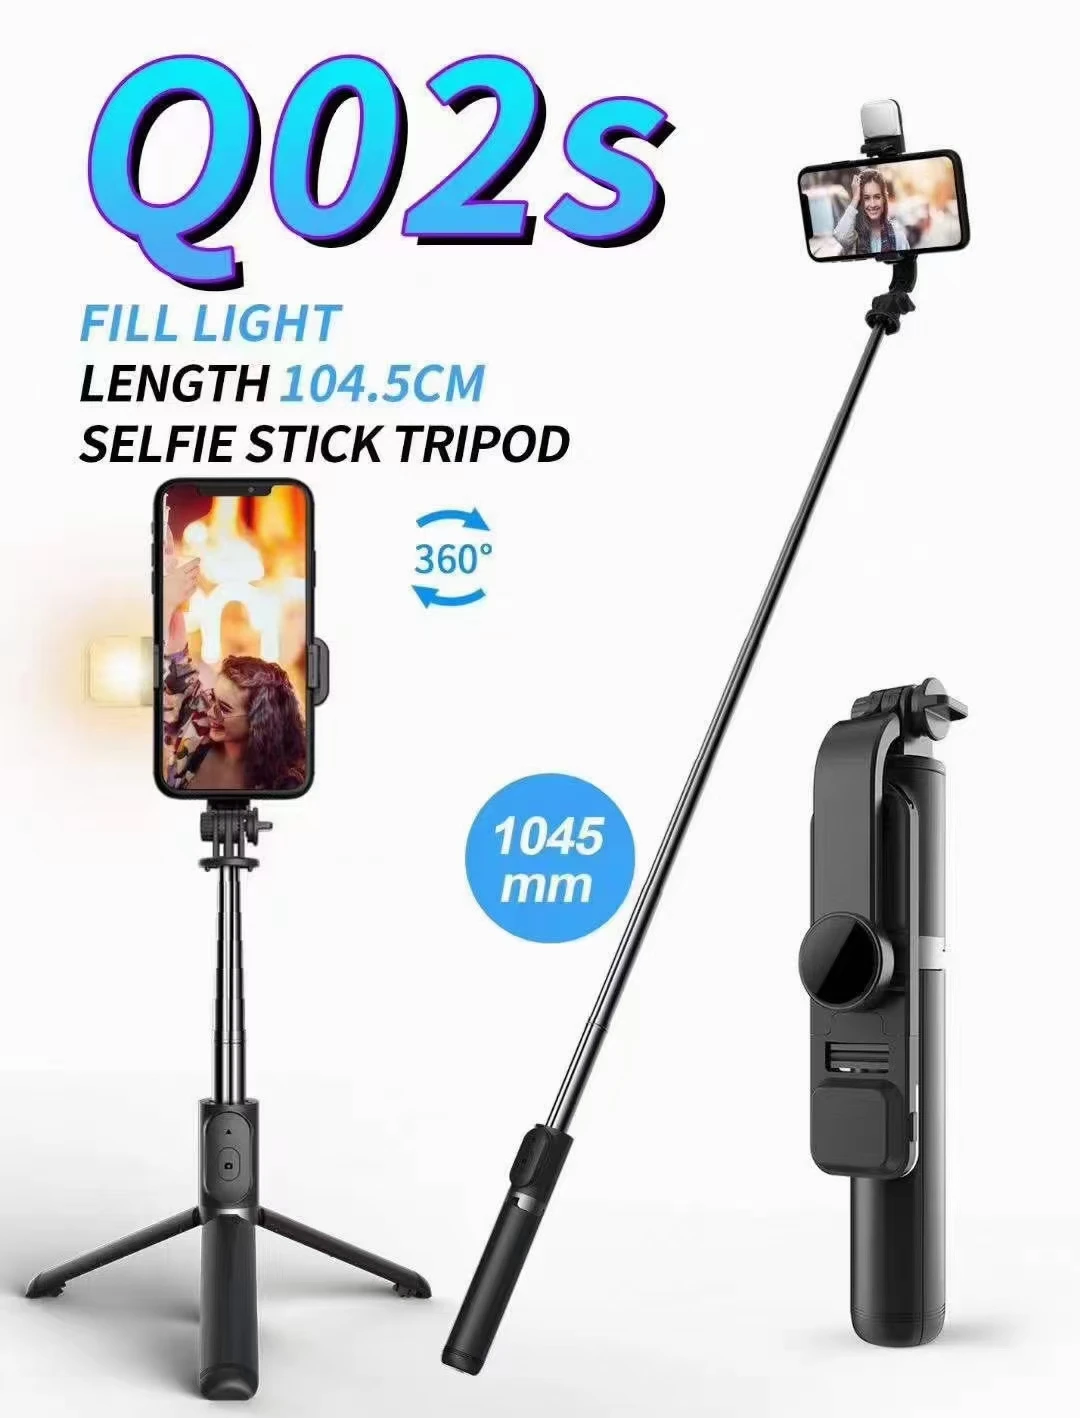 Q02s Wireless Remote Control Monopod Selfie Stick Bluetooths Tripod 3 in 1 with LED Fill Light for Smartphone